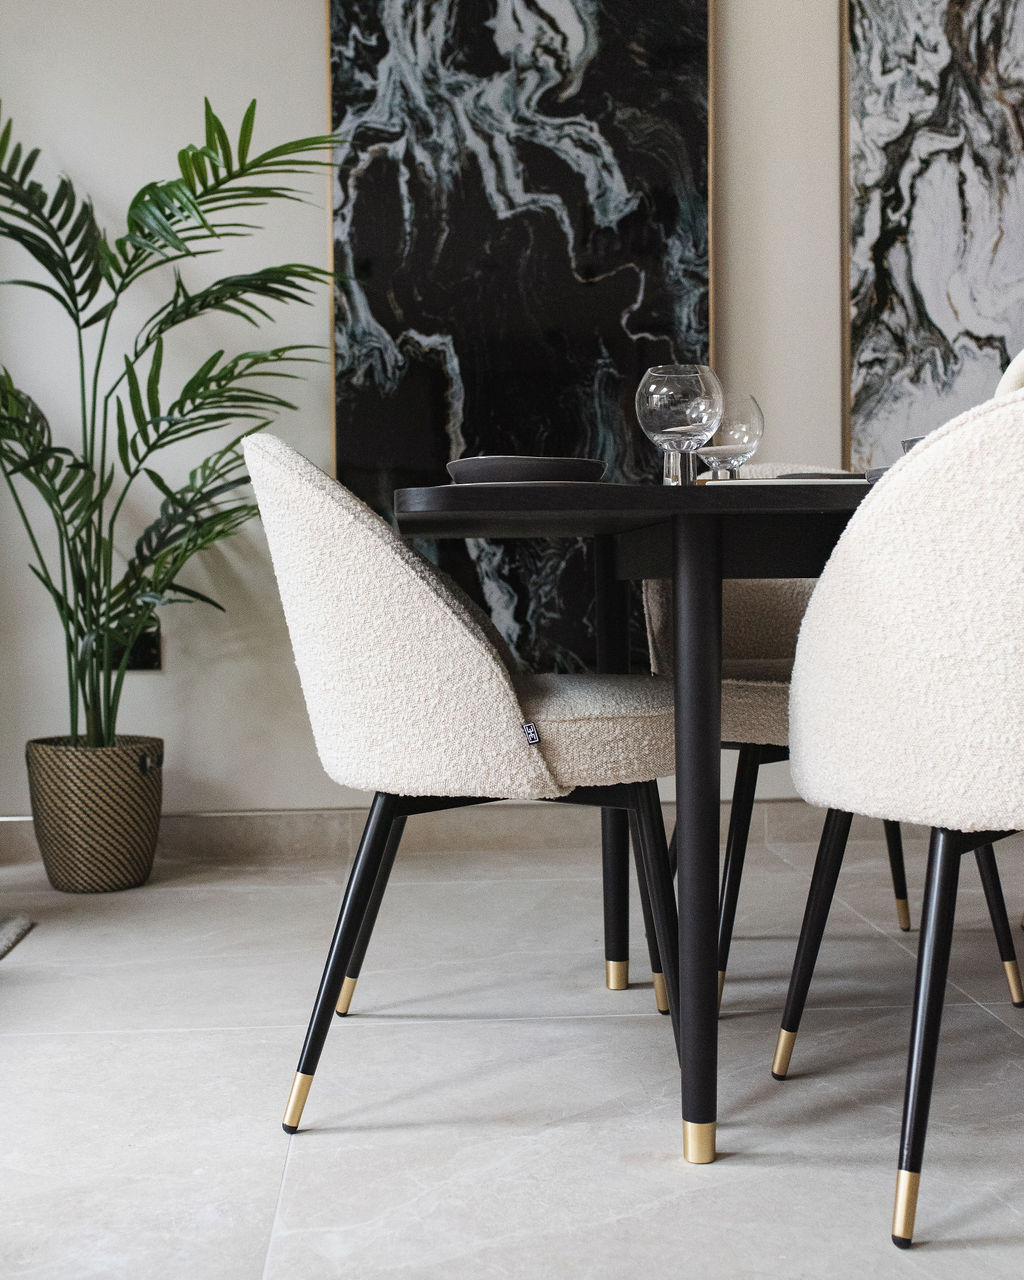 cream dinings chairs with black legs